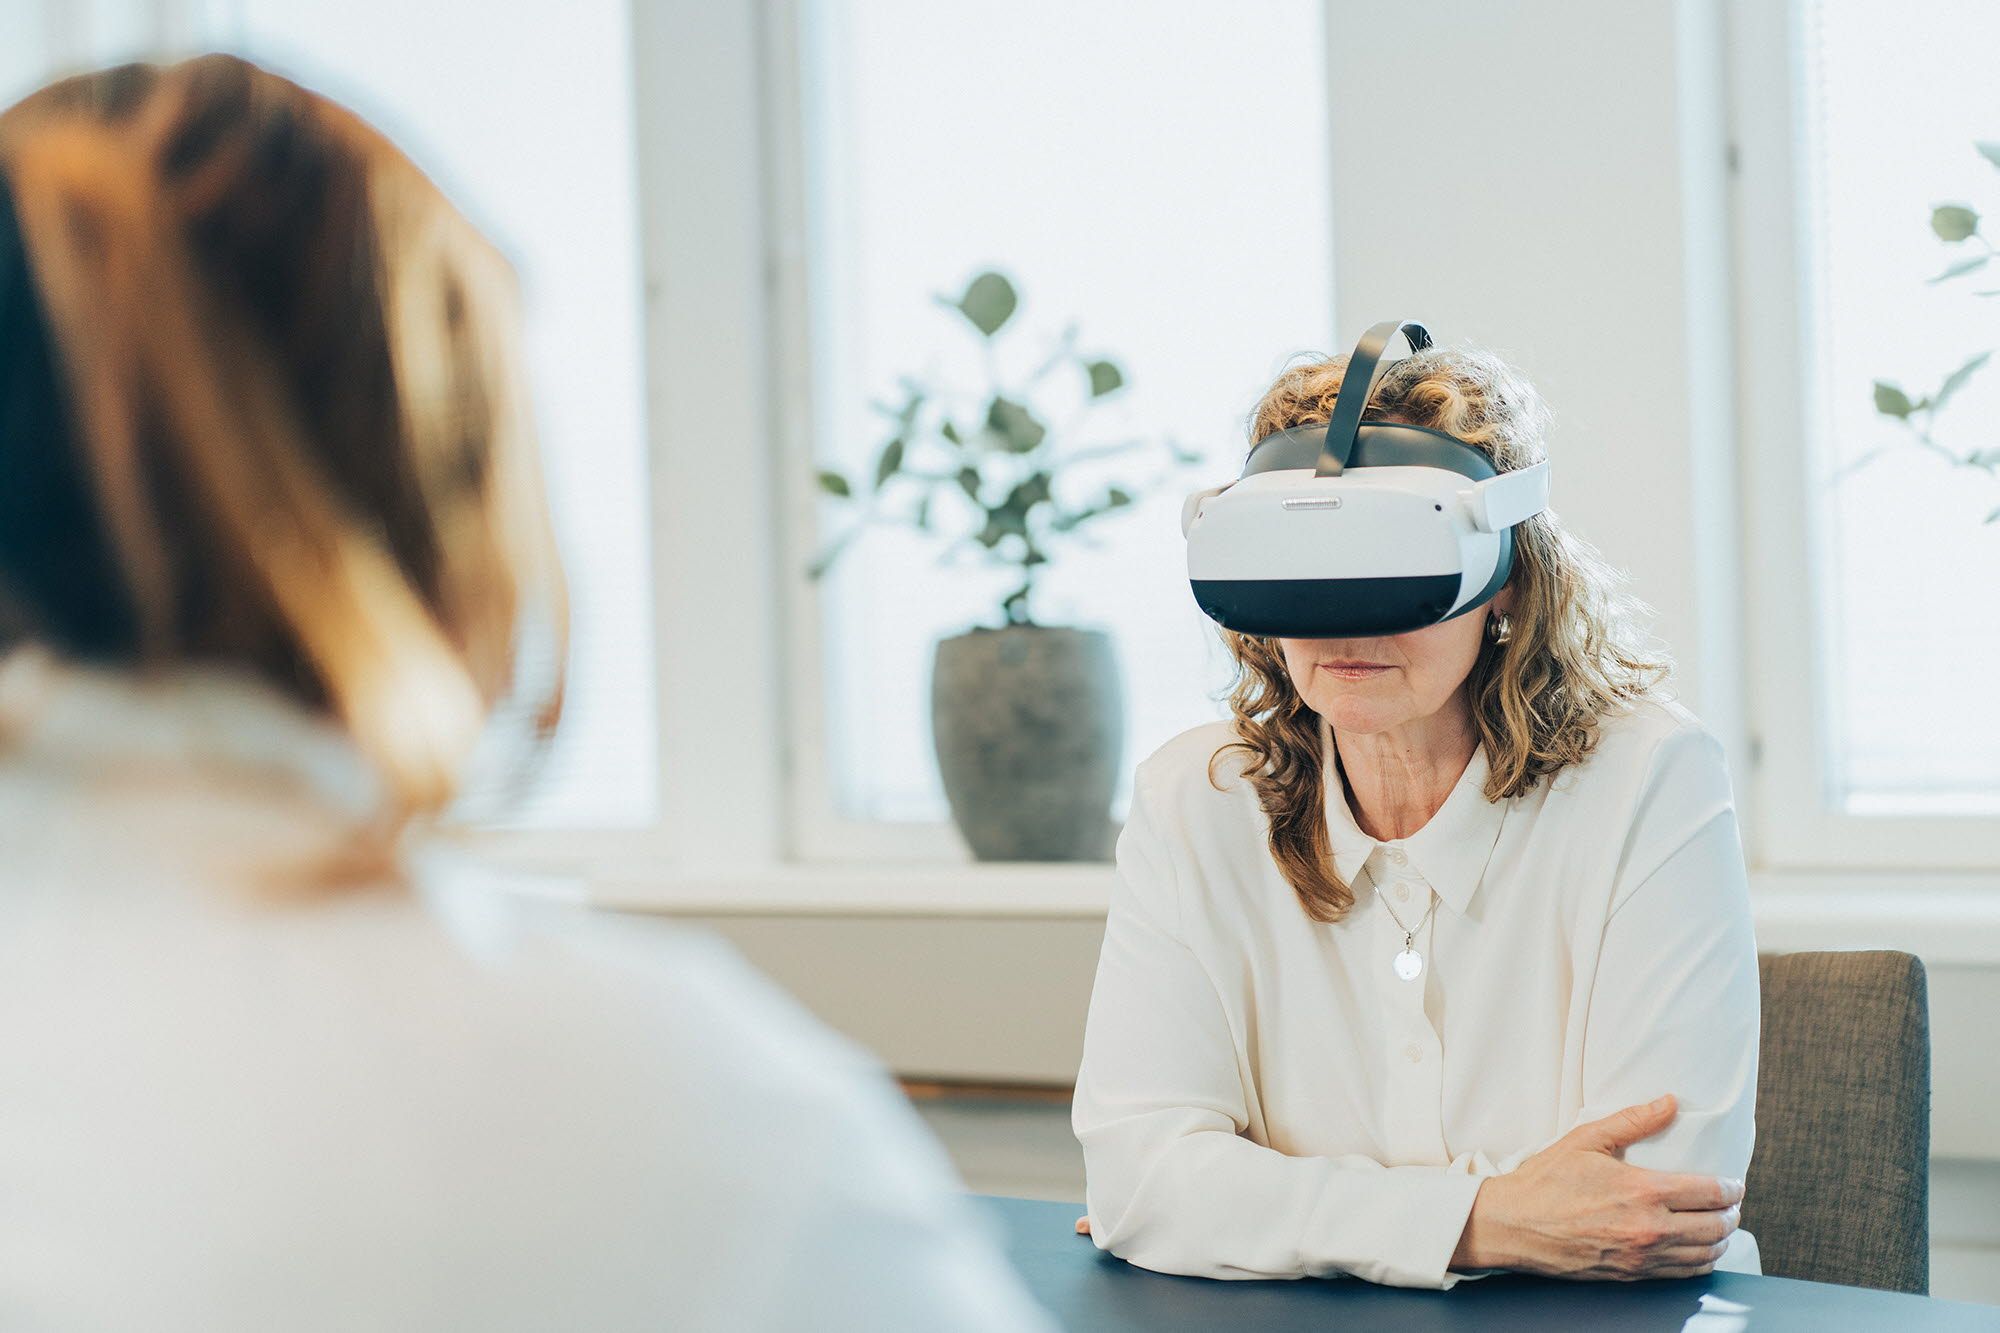 VR headset used for therapy